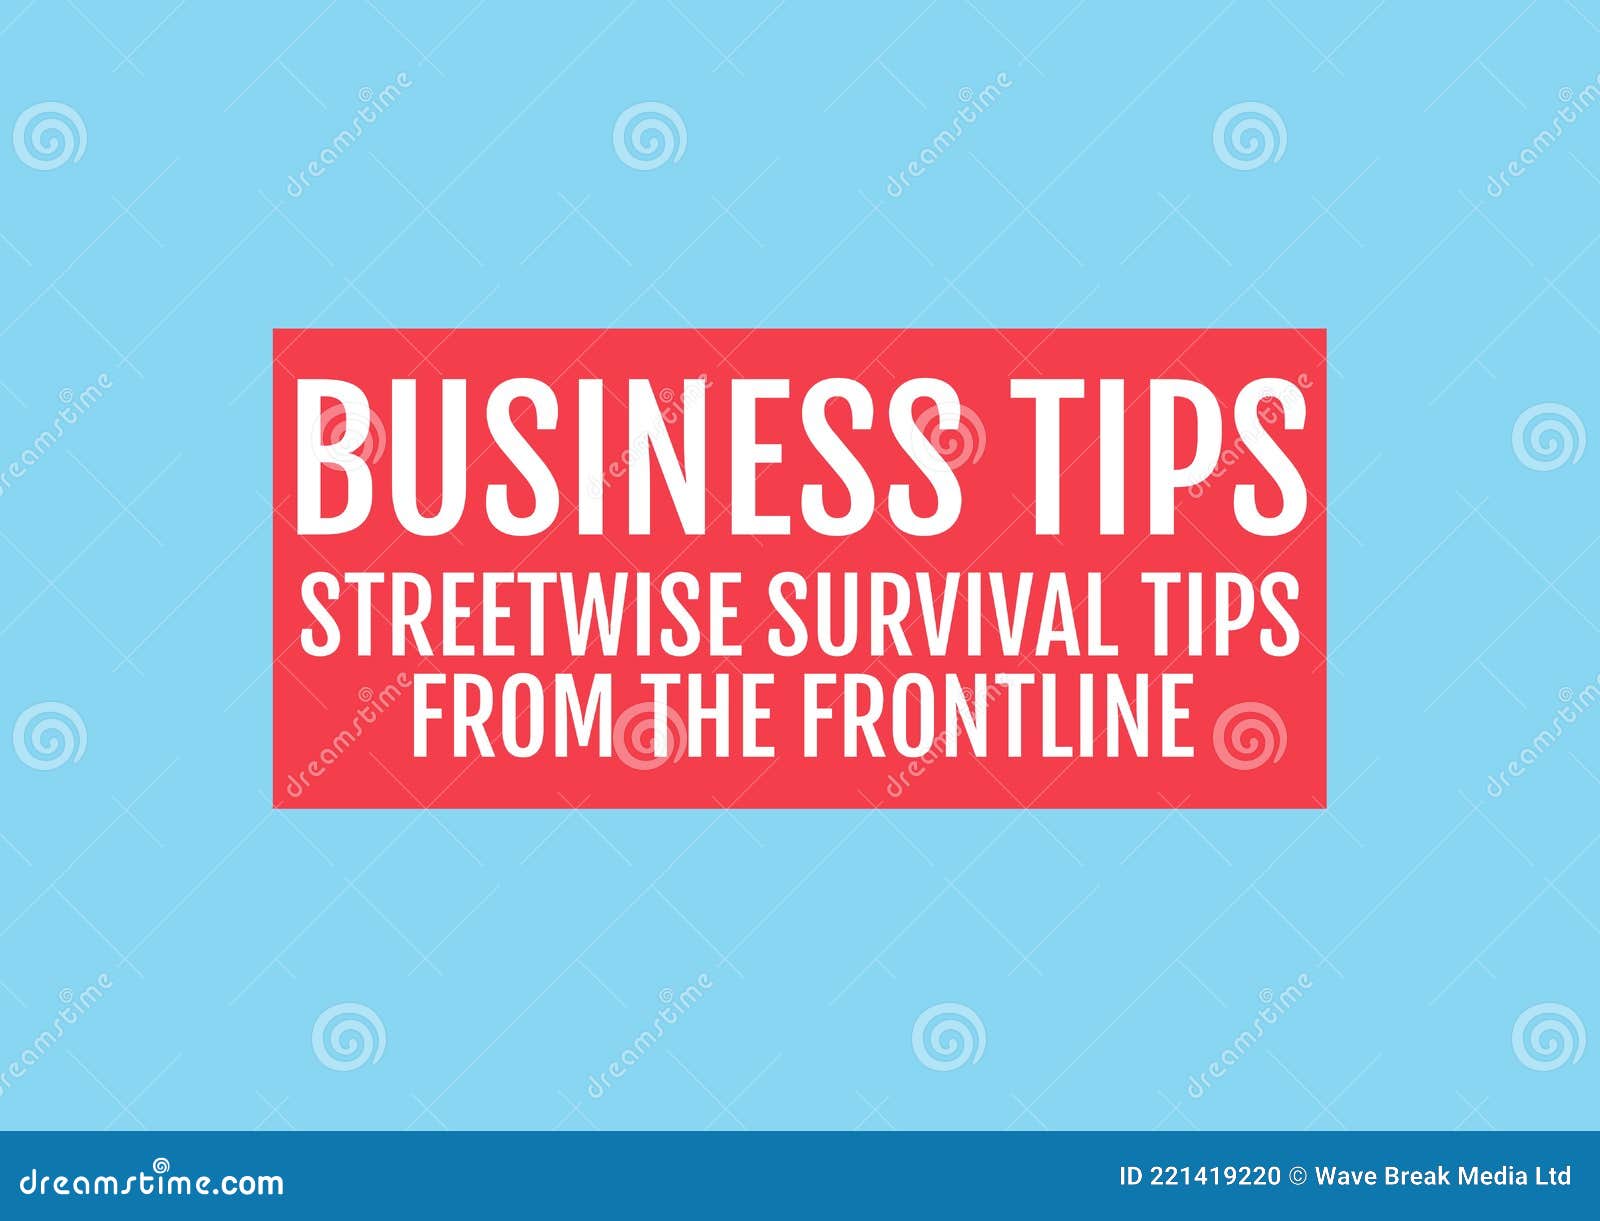 composition of business tips streetwise survival tips text in white in red rectangle, on blue